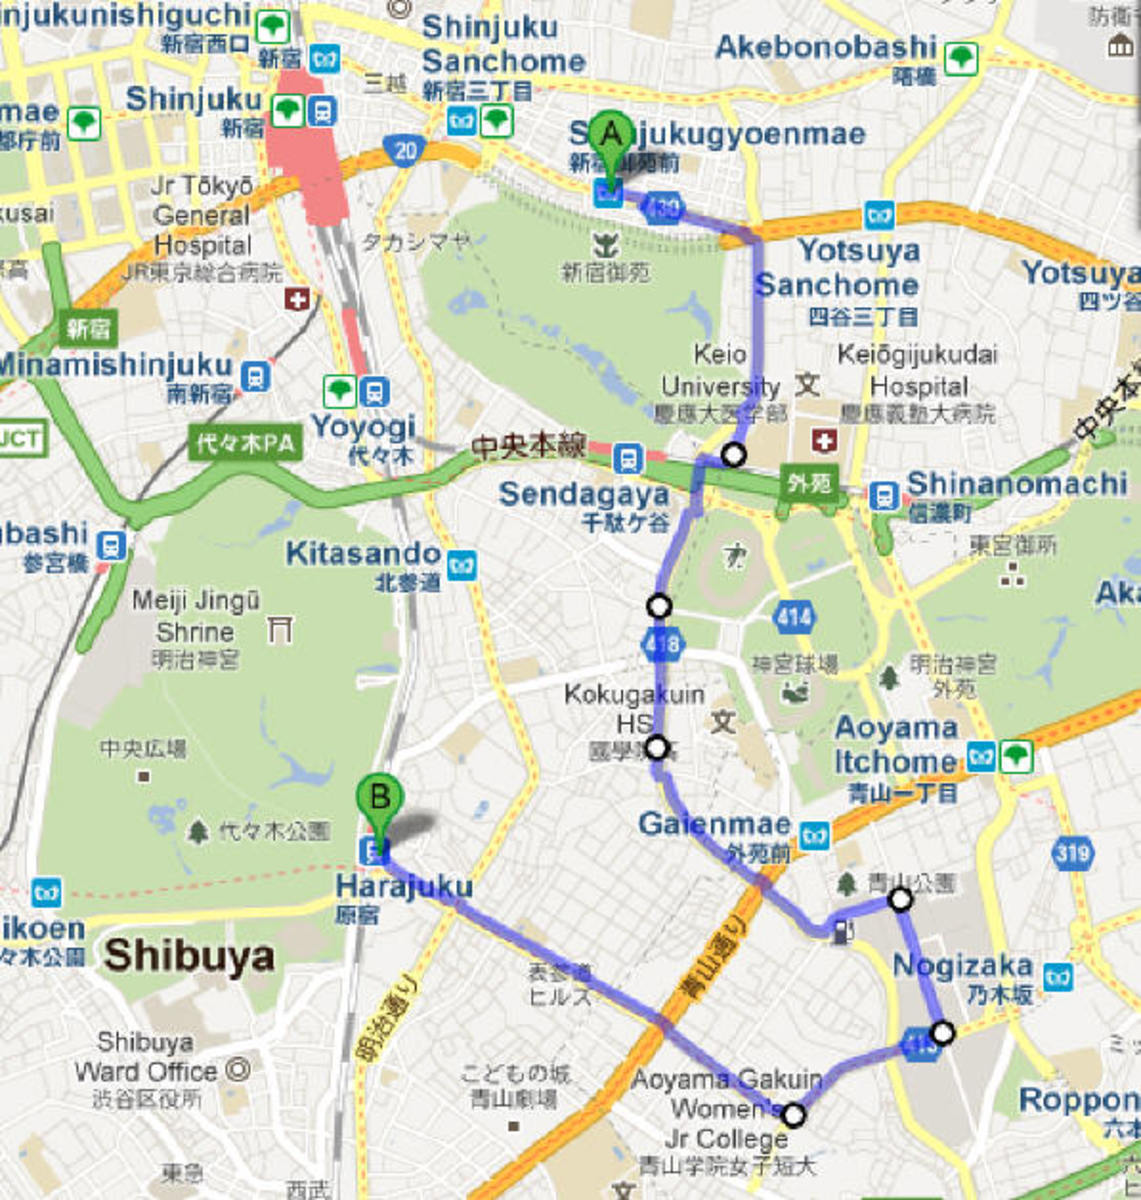 This is the route we took on the fine Sunday of April 1st. I can't manage Google to paint the route through Shinjuku park, but the rest is quite accurate. It's a distance of about 6.5 kilometers (about 4 miles).